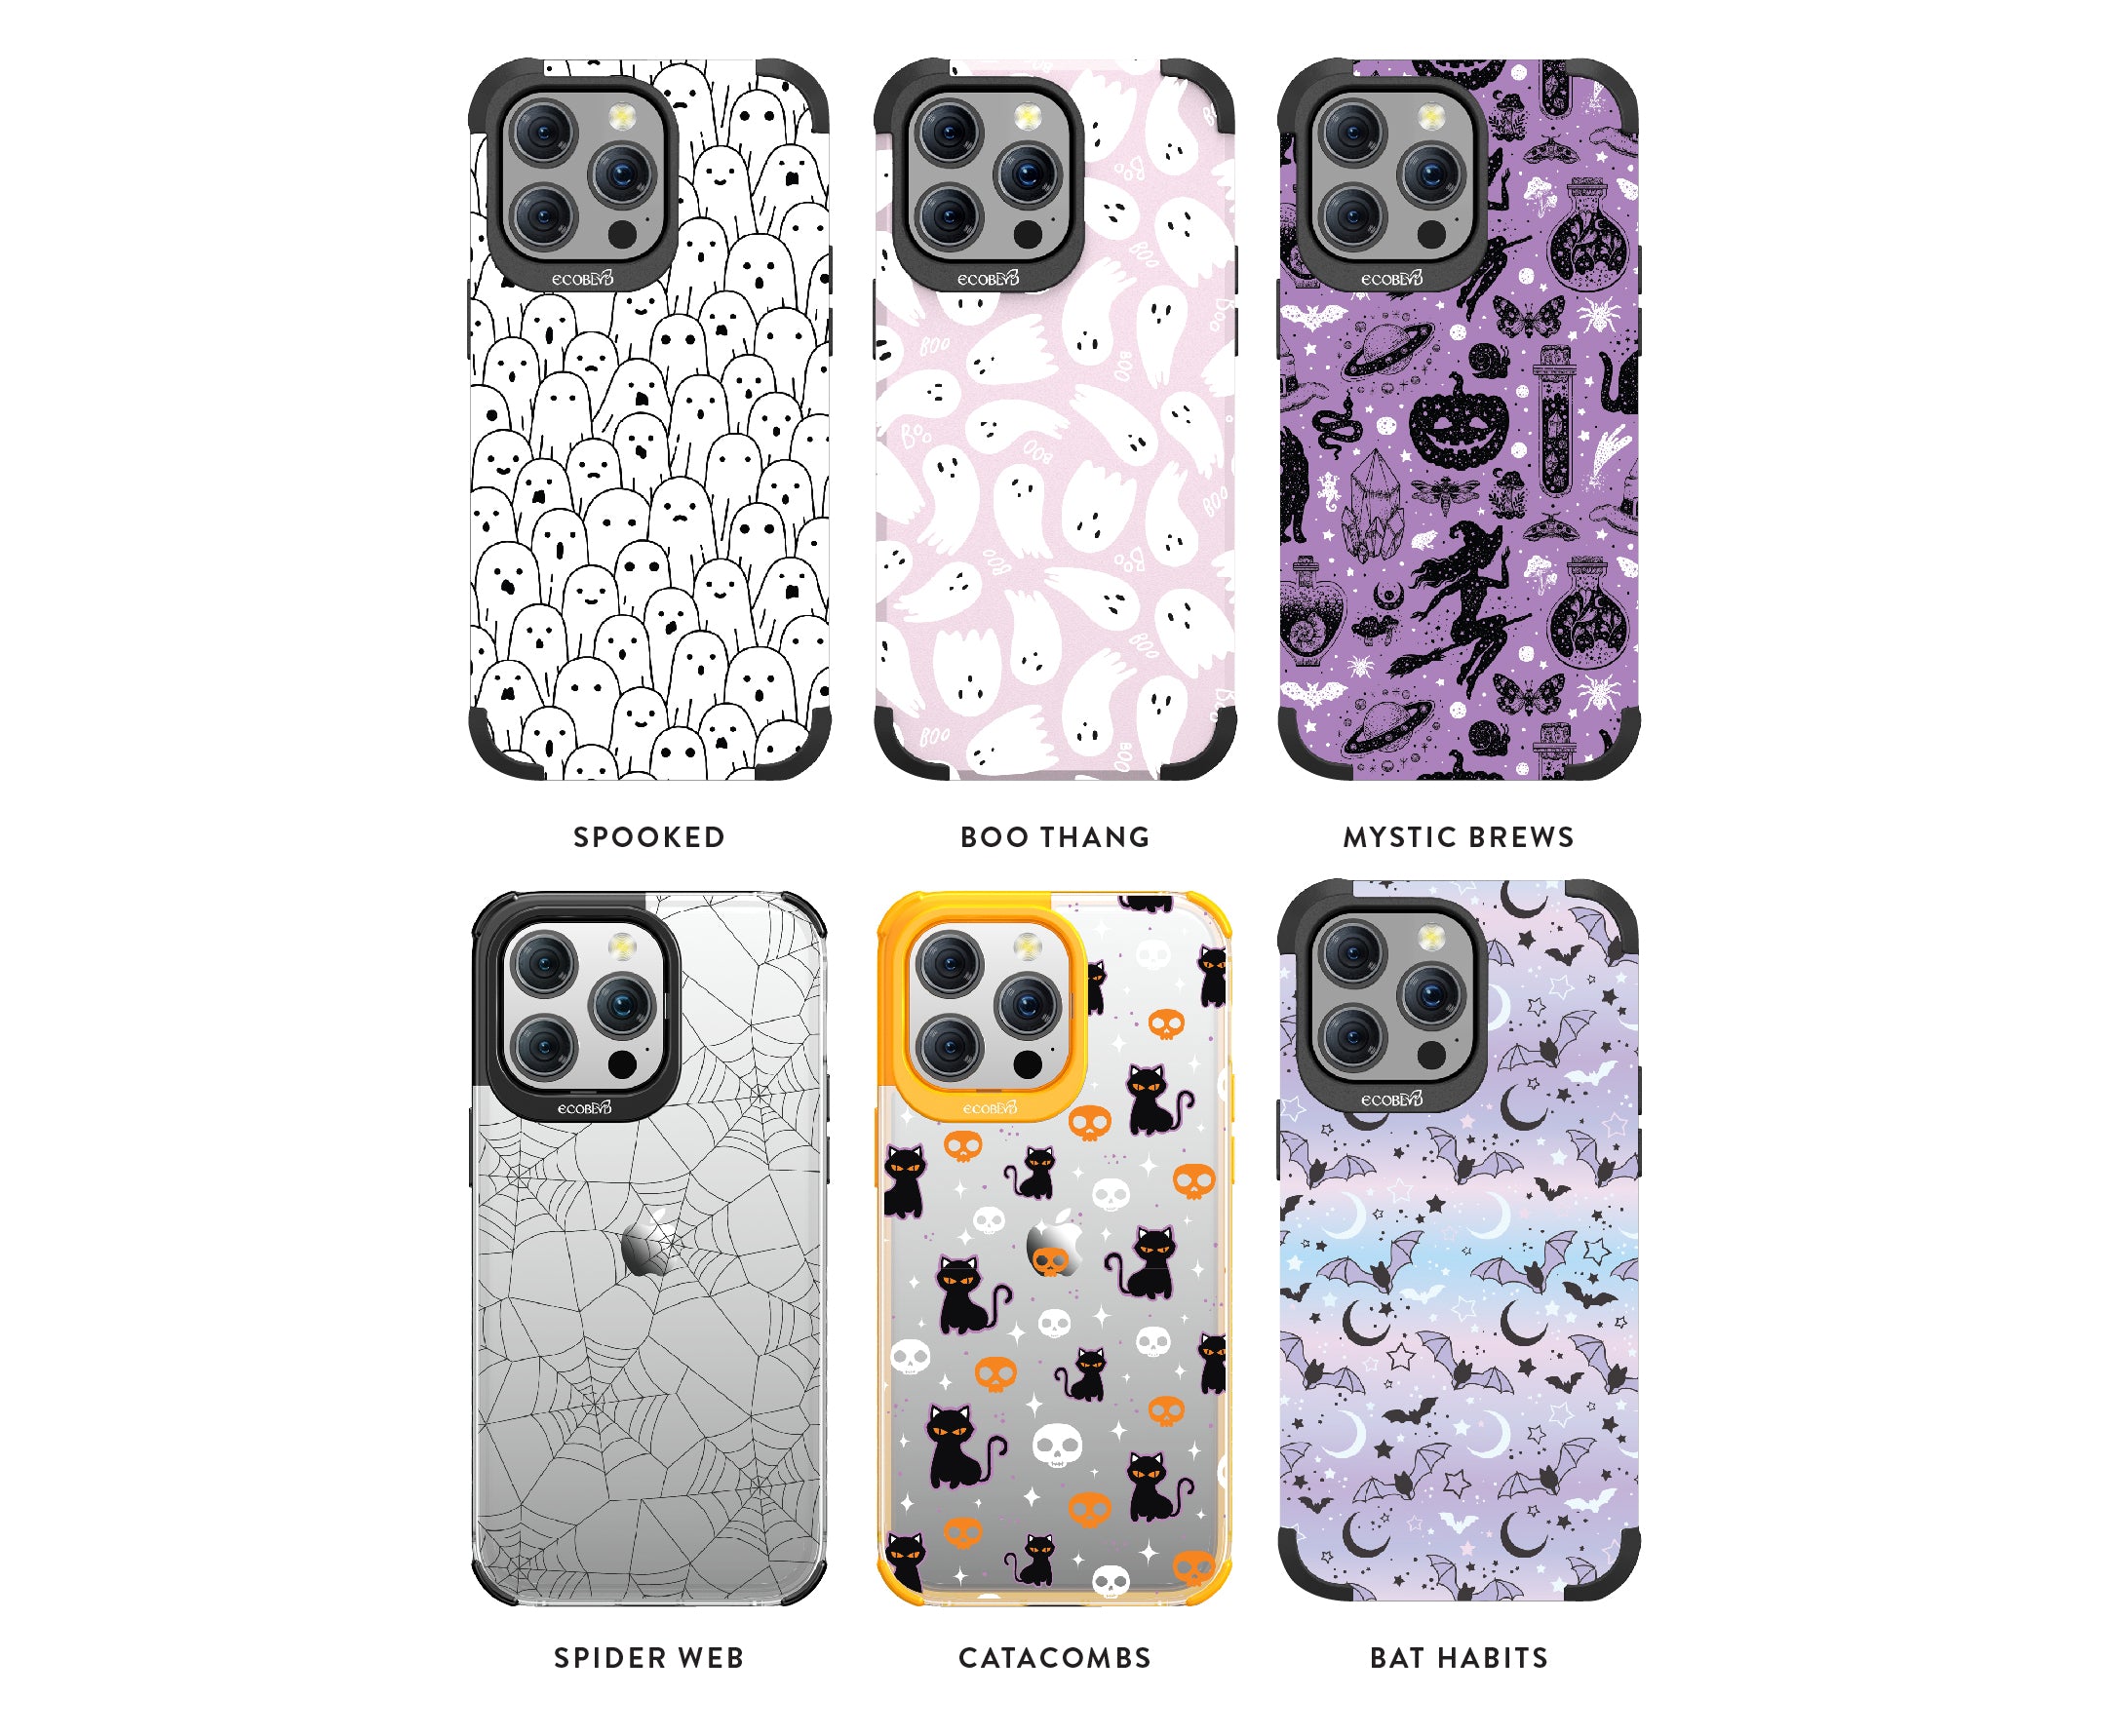 EcoBlvd's Spooked, Boo Thang, Mystic Brews, Spider Web, Catacomb and Bat Habits Phone Case Designs